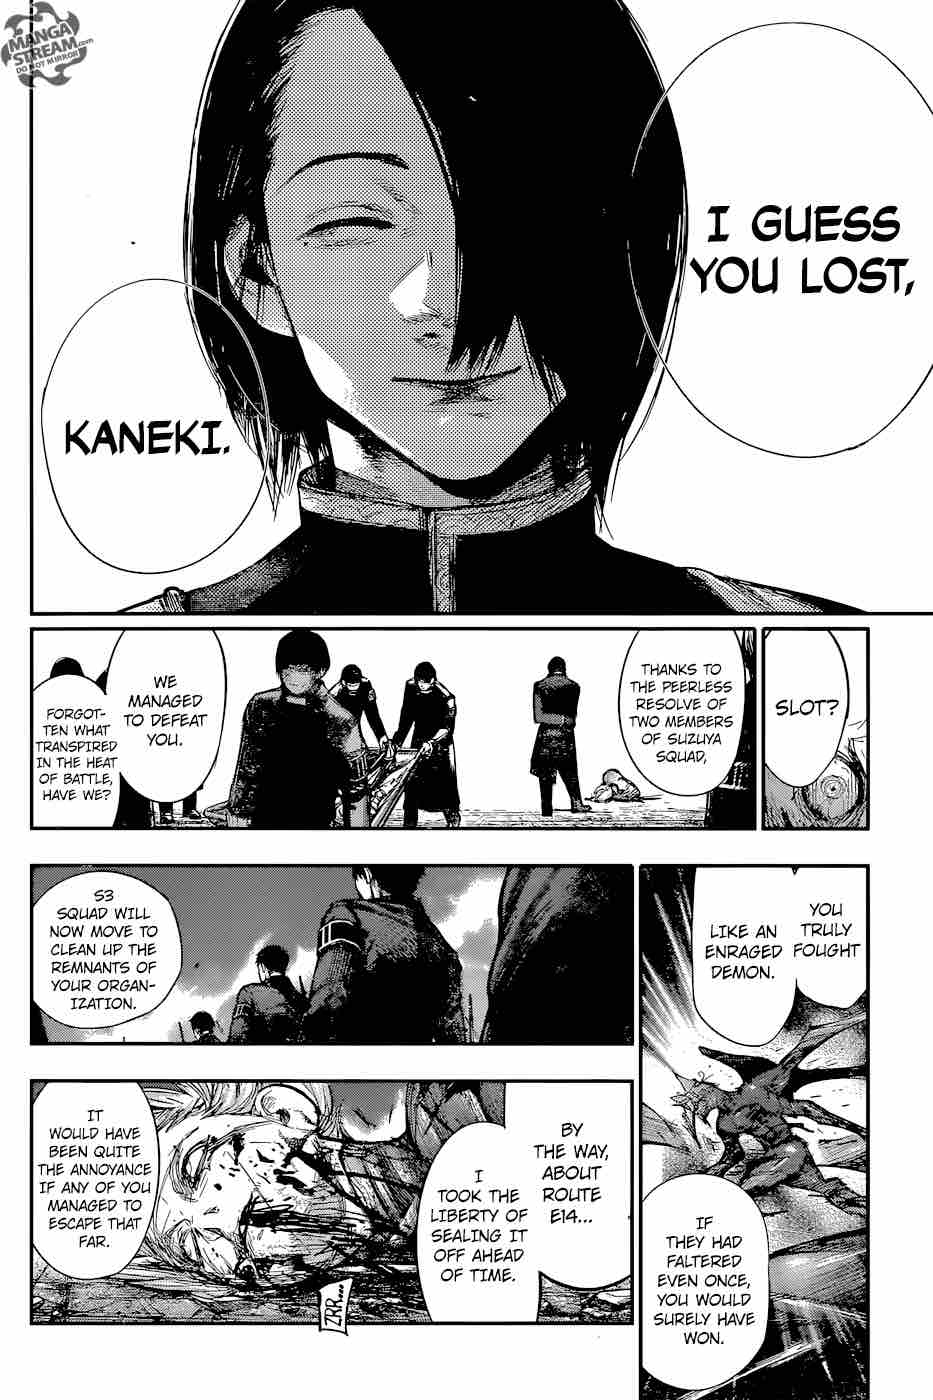 Tokyo Ghoul Re Chapter 143 Tokyo Ghoul Manga Online